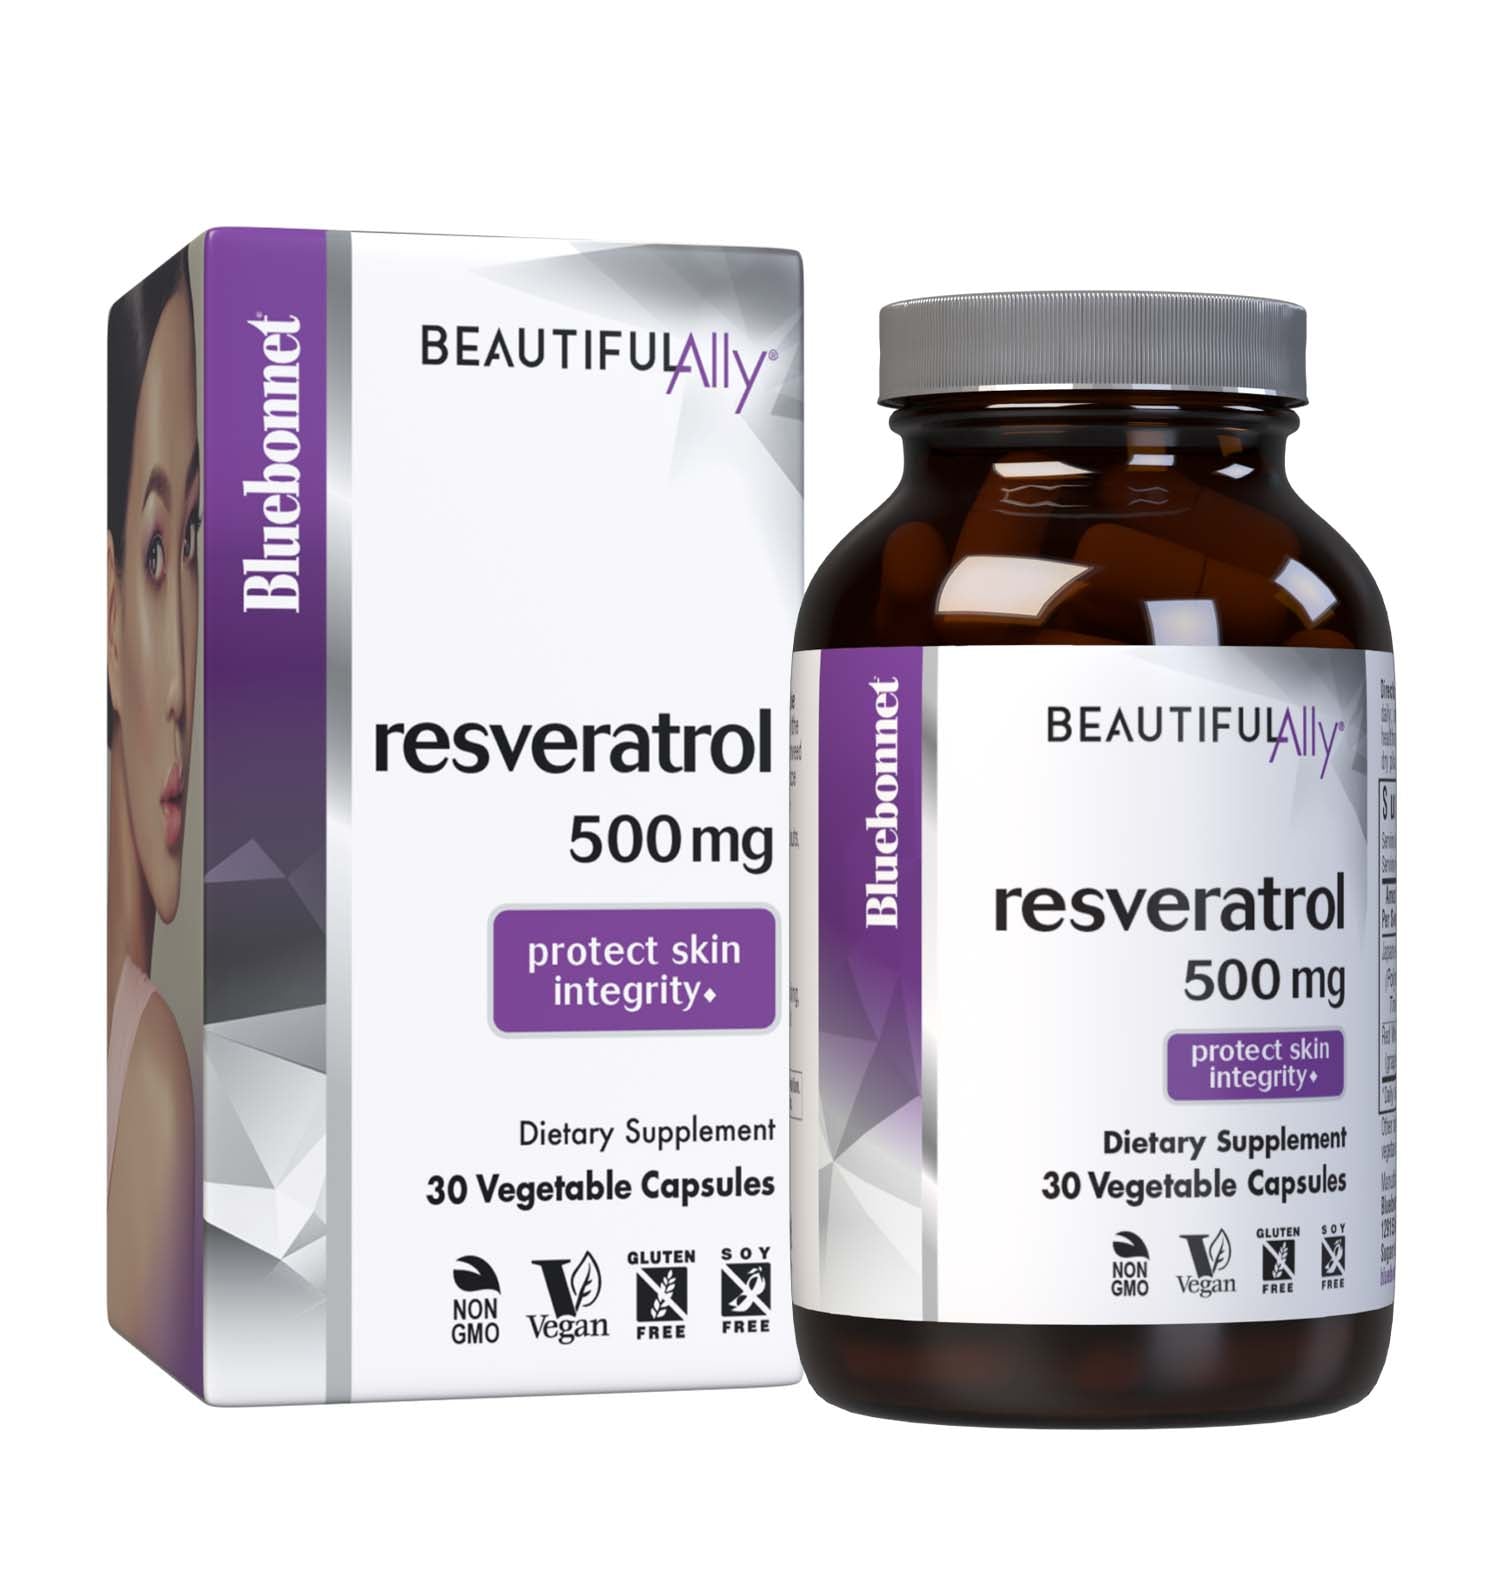 Bluebonnet’s Beautiful Ally Resveratrol 500 mg 30 Vegetable Capsules are specially formulated to help protect skin with the active trans isomer form of resveratrol from Japanese knotweed and 4:1 red wine extract from grape berry fruit to help reduce free-radical damage, which may improve skin integrity. Bottle with box. #size_30 count